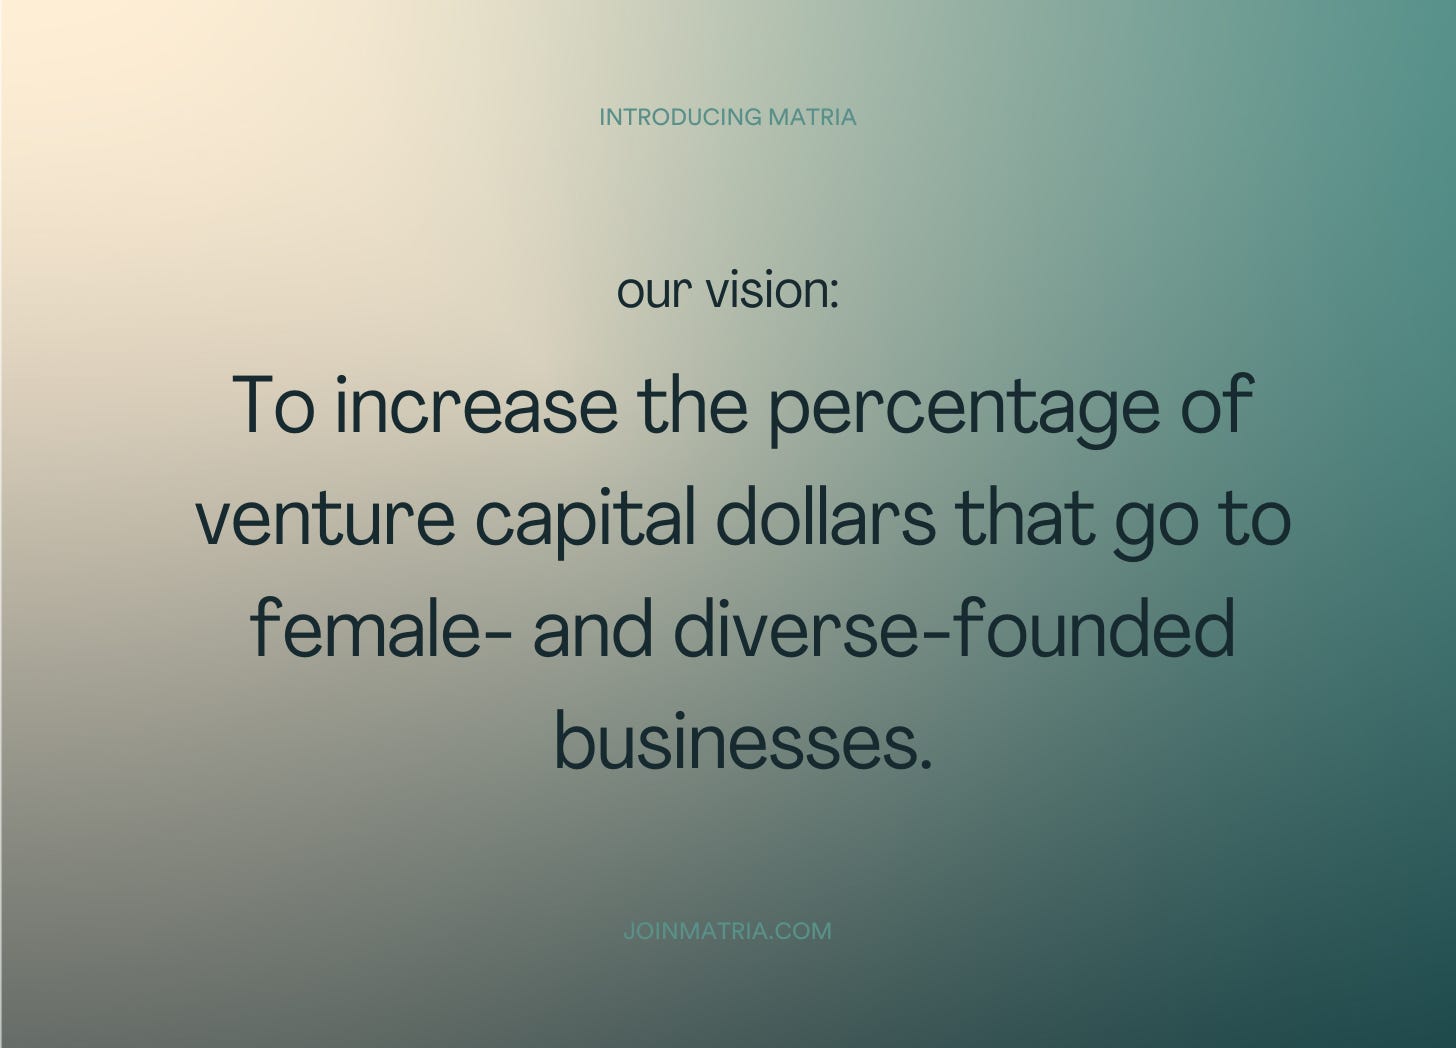 To increase the percentage of venture capital dollars that go to female- and diverse-founded businesses.